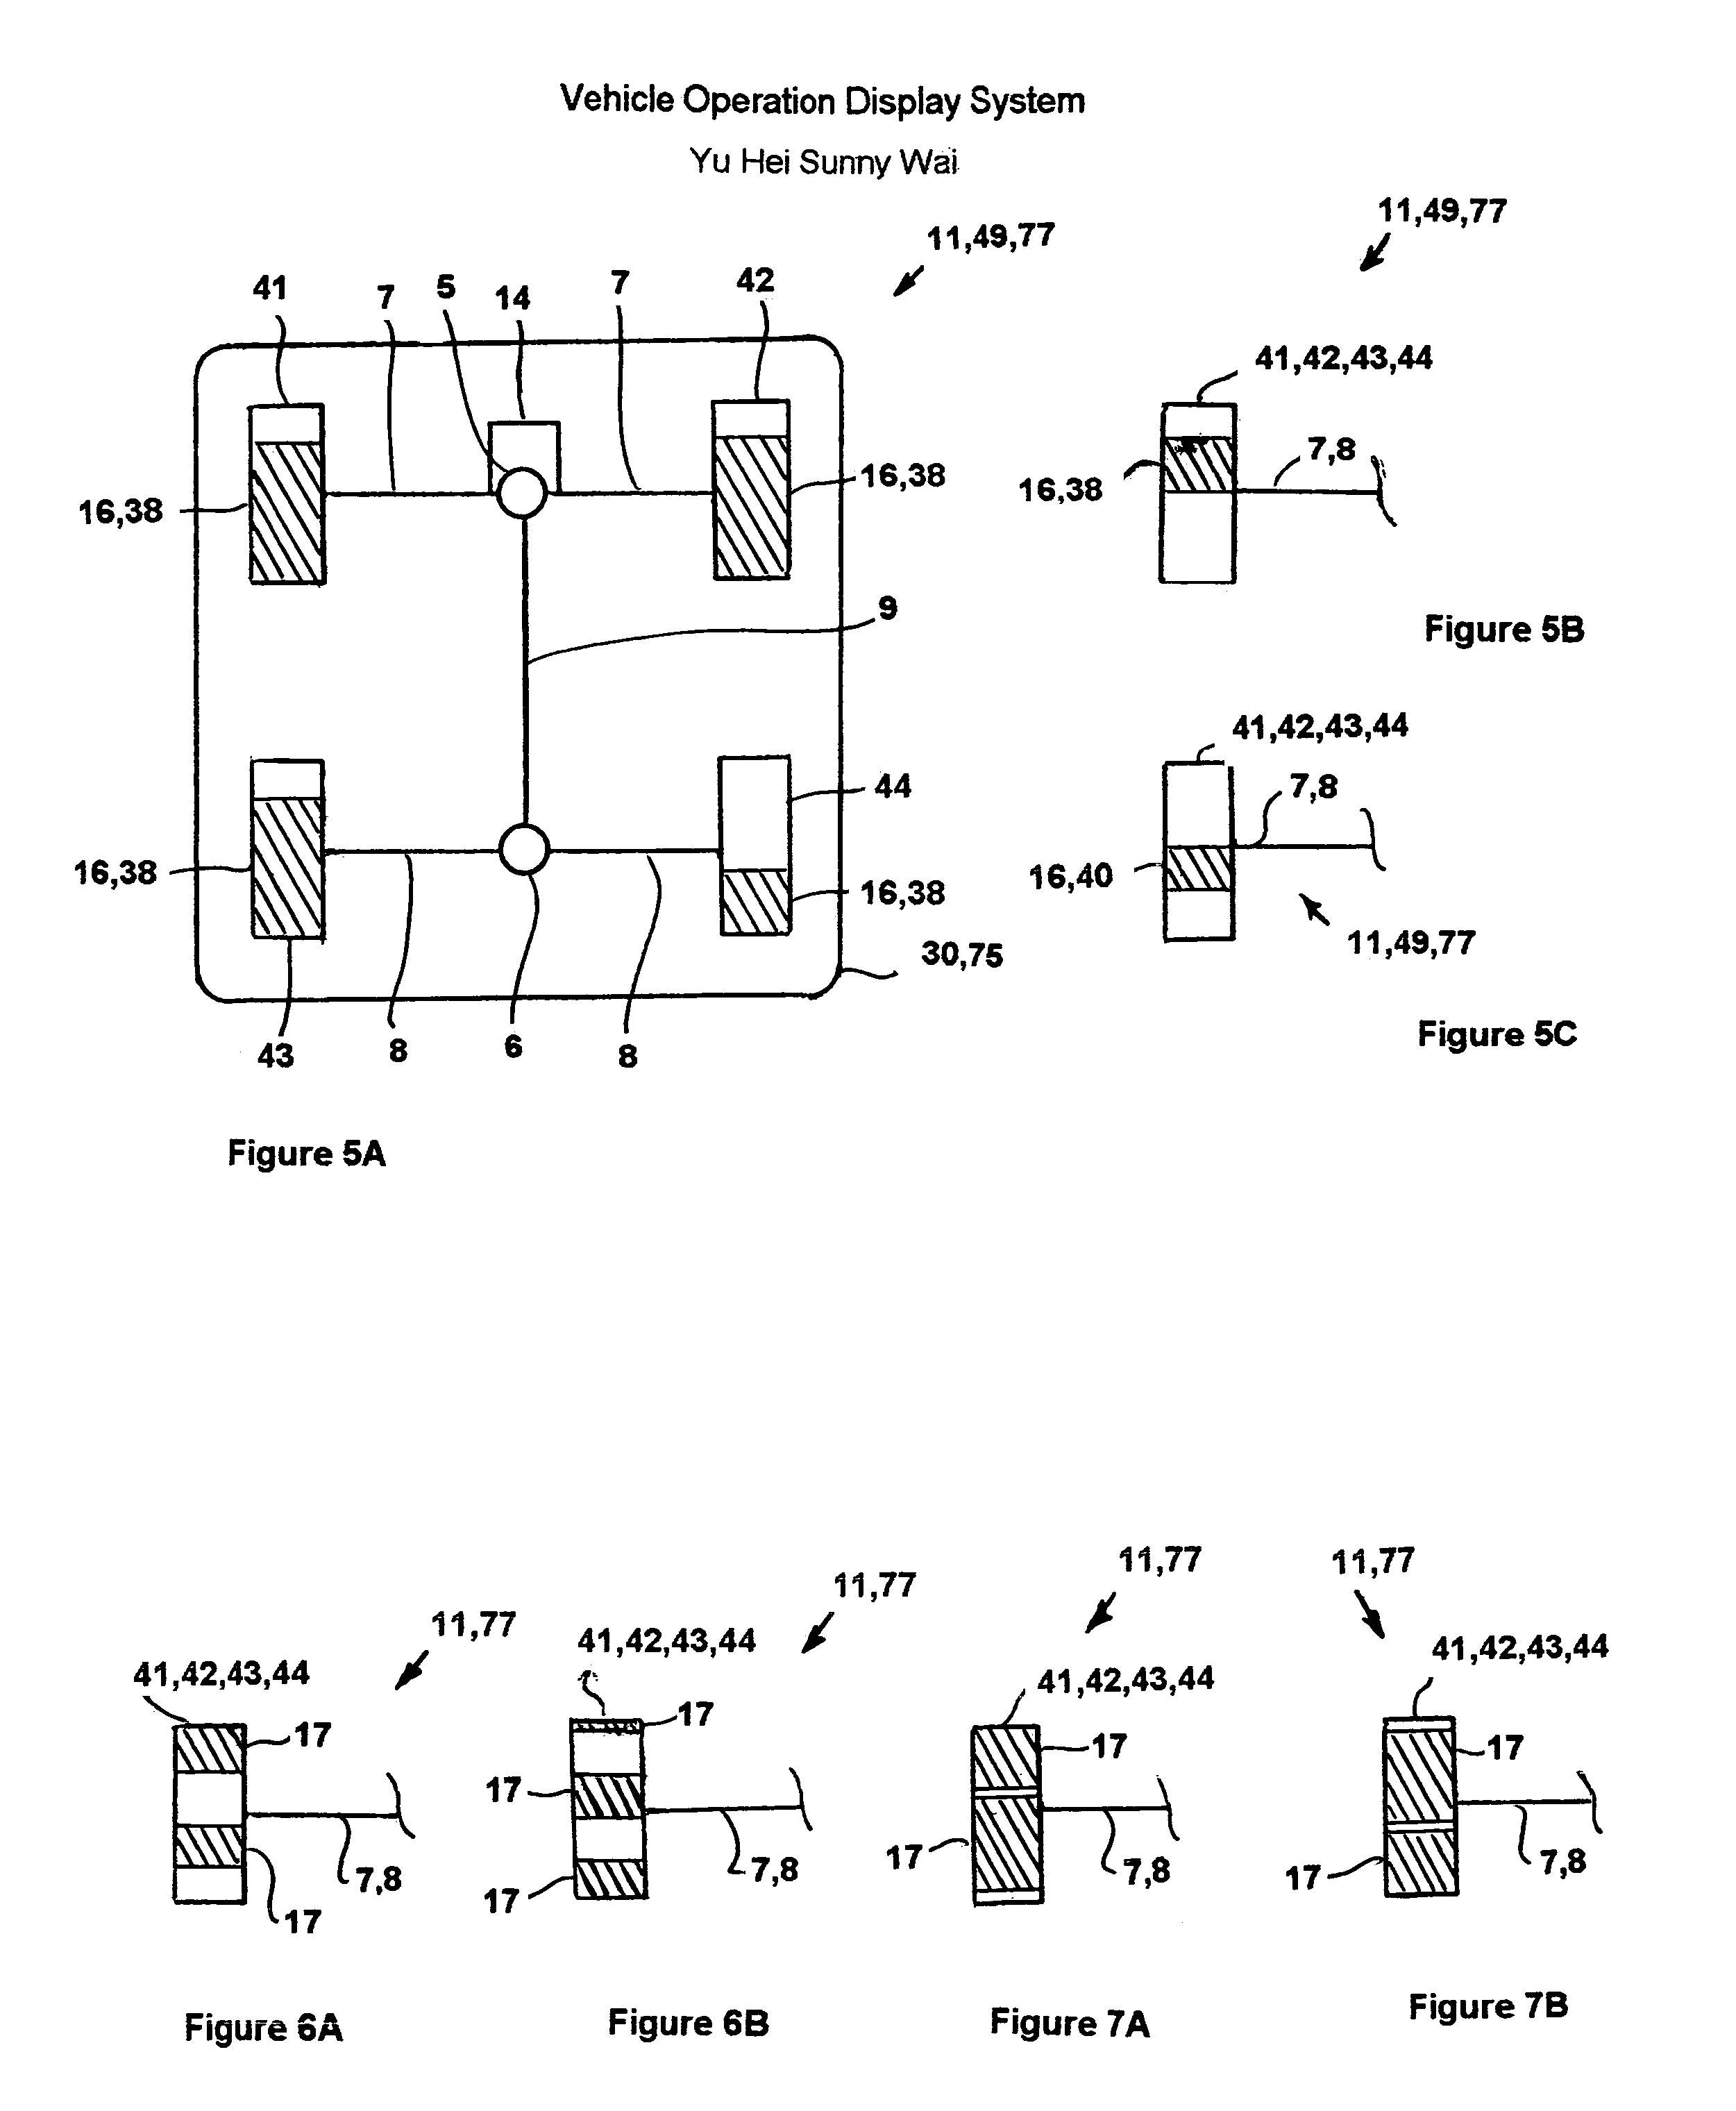 Vehicle operation display system